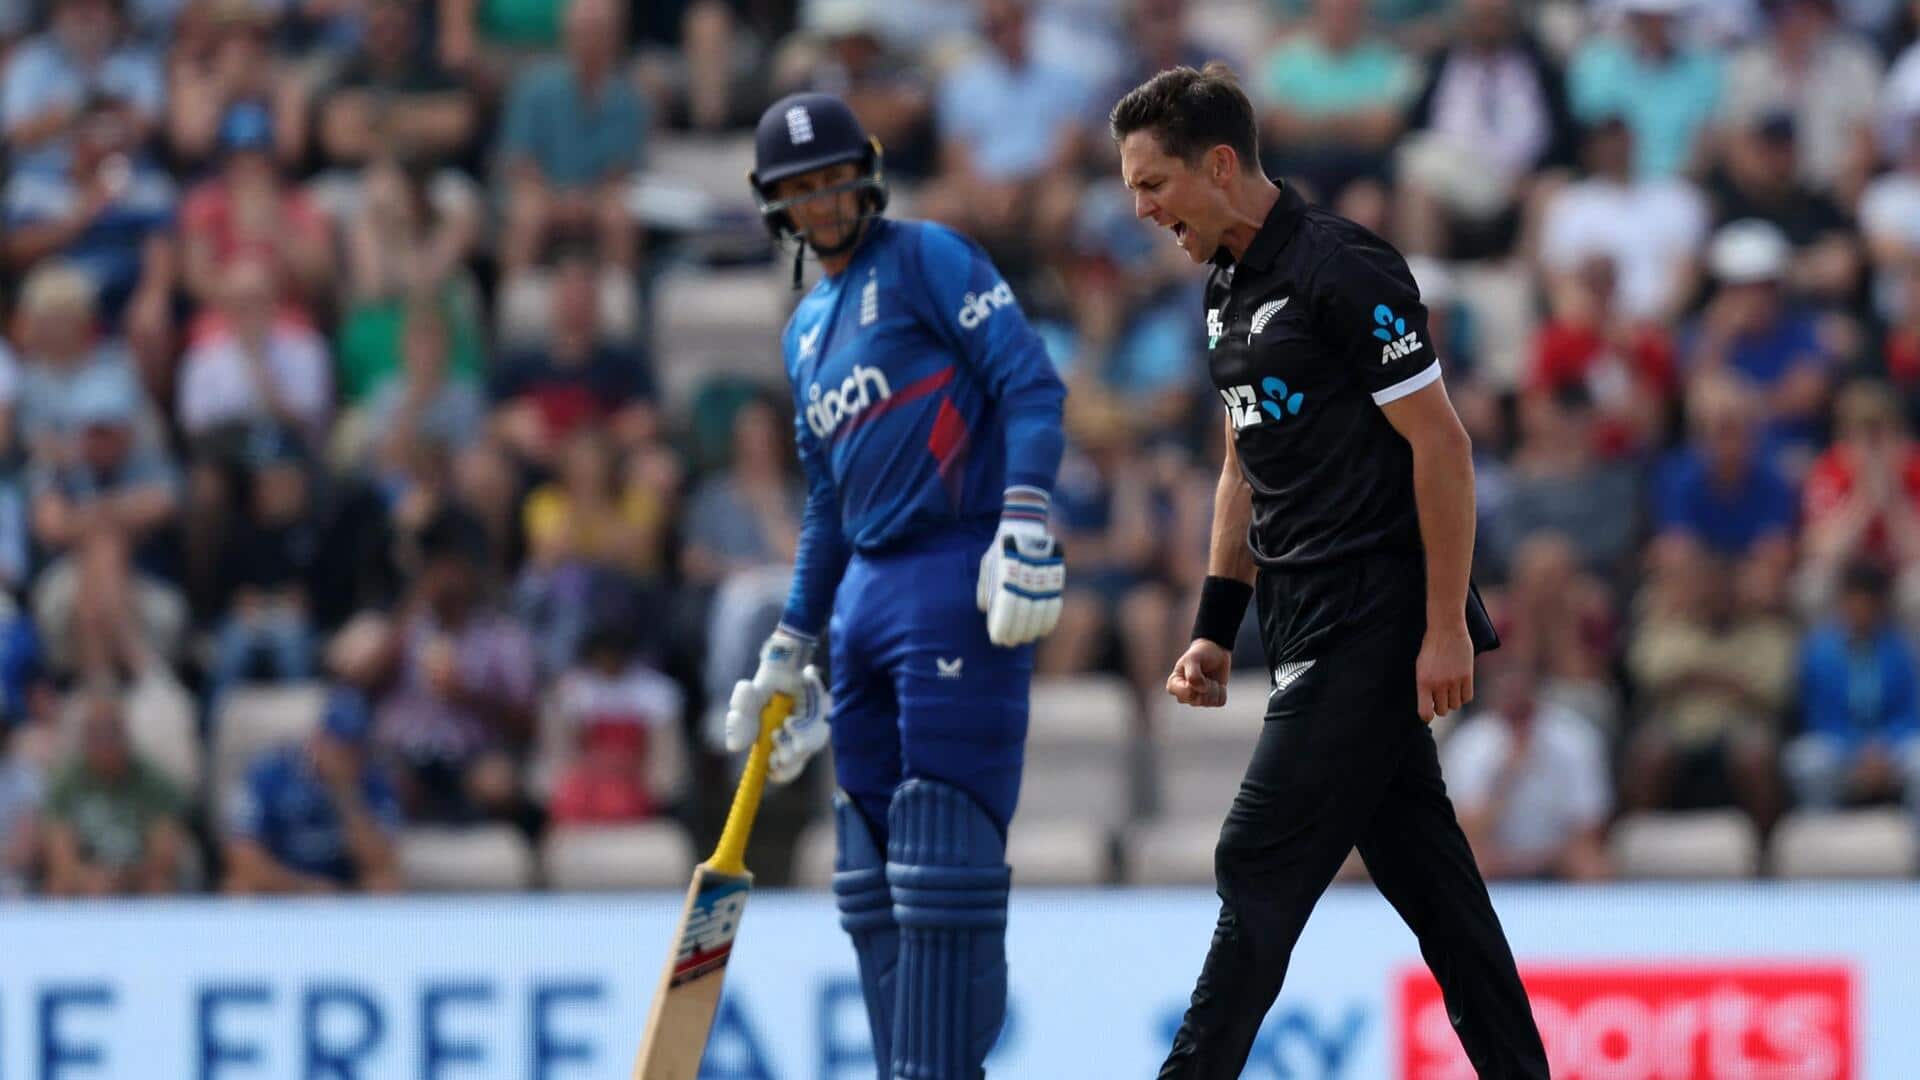 England beat New Zealand in 2nd ODI, level series: Stats